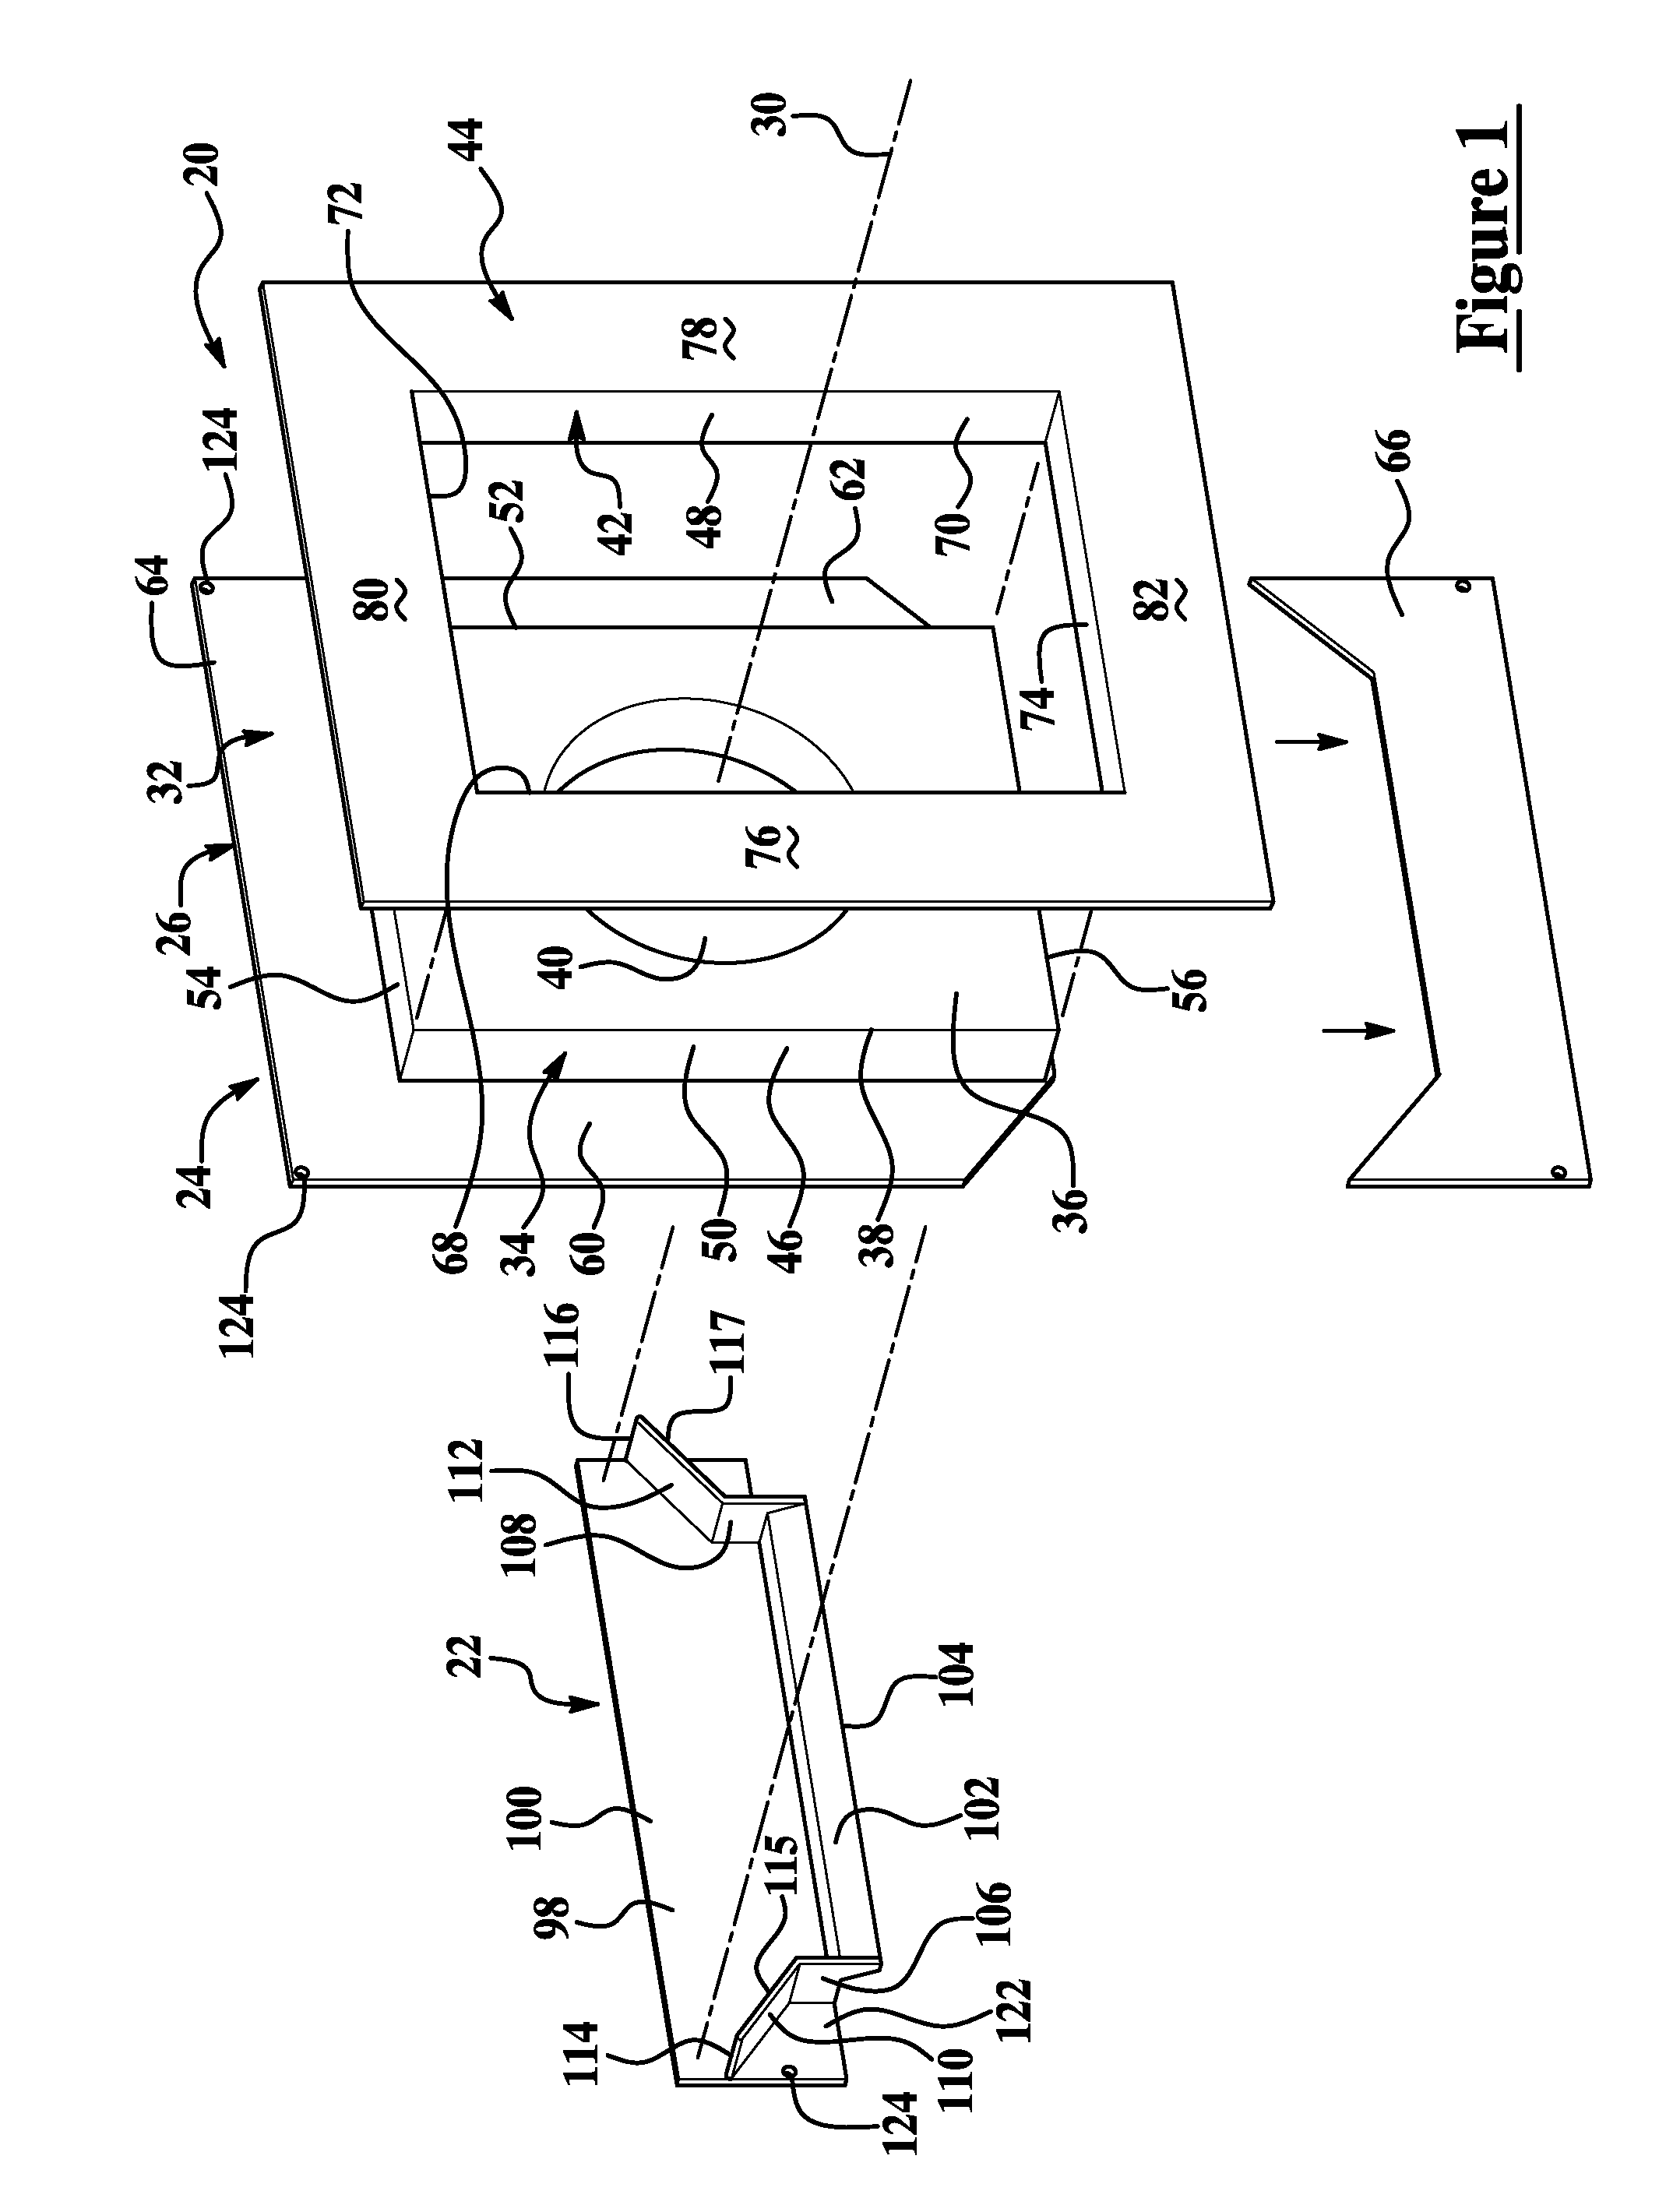 Exterior siding mounting bracket assembly and method of assembly